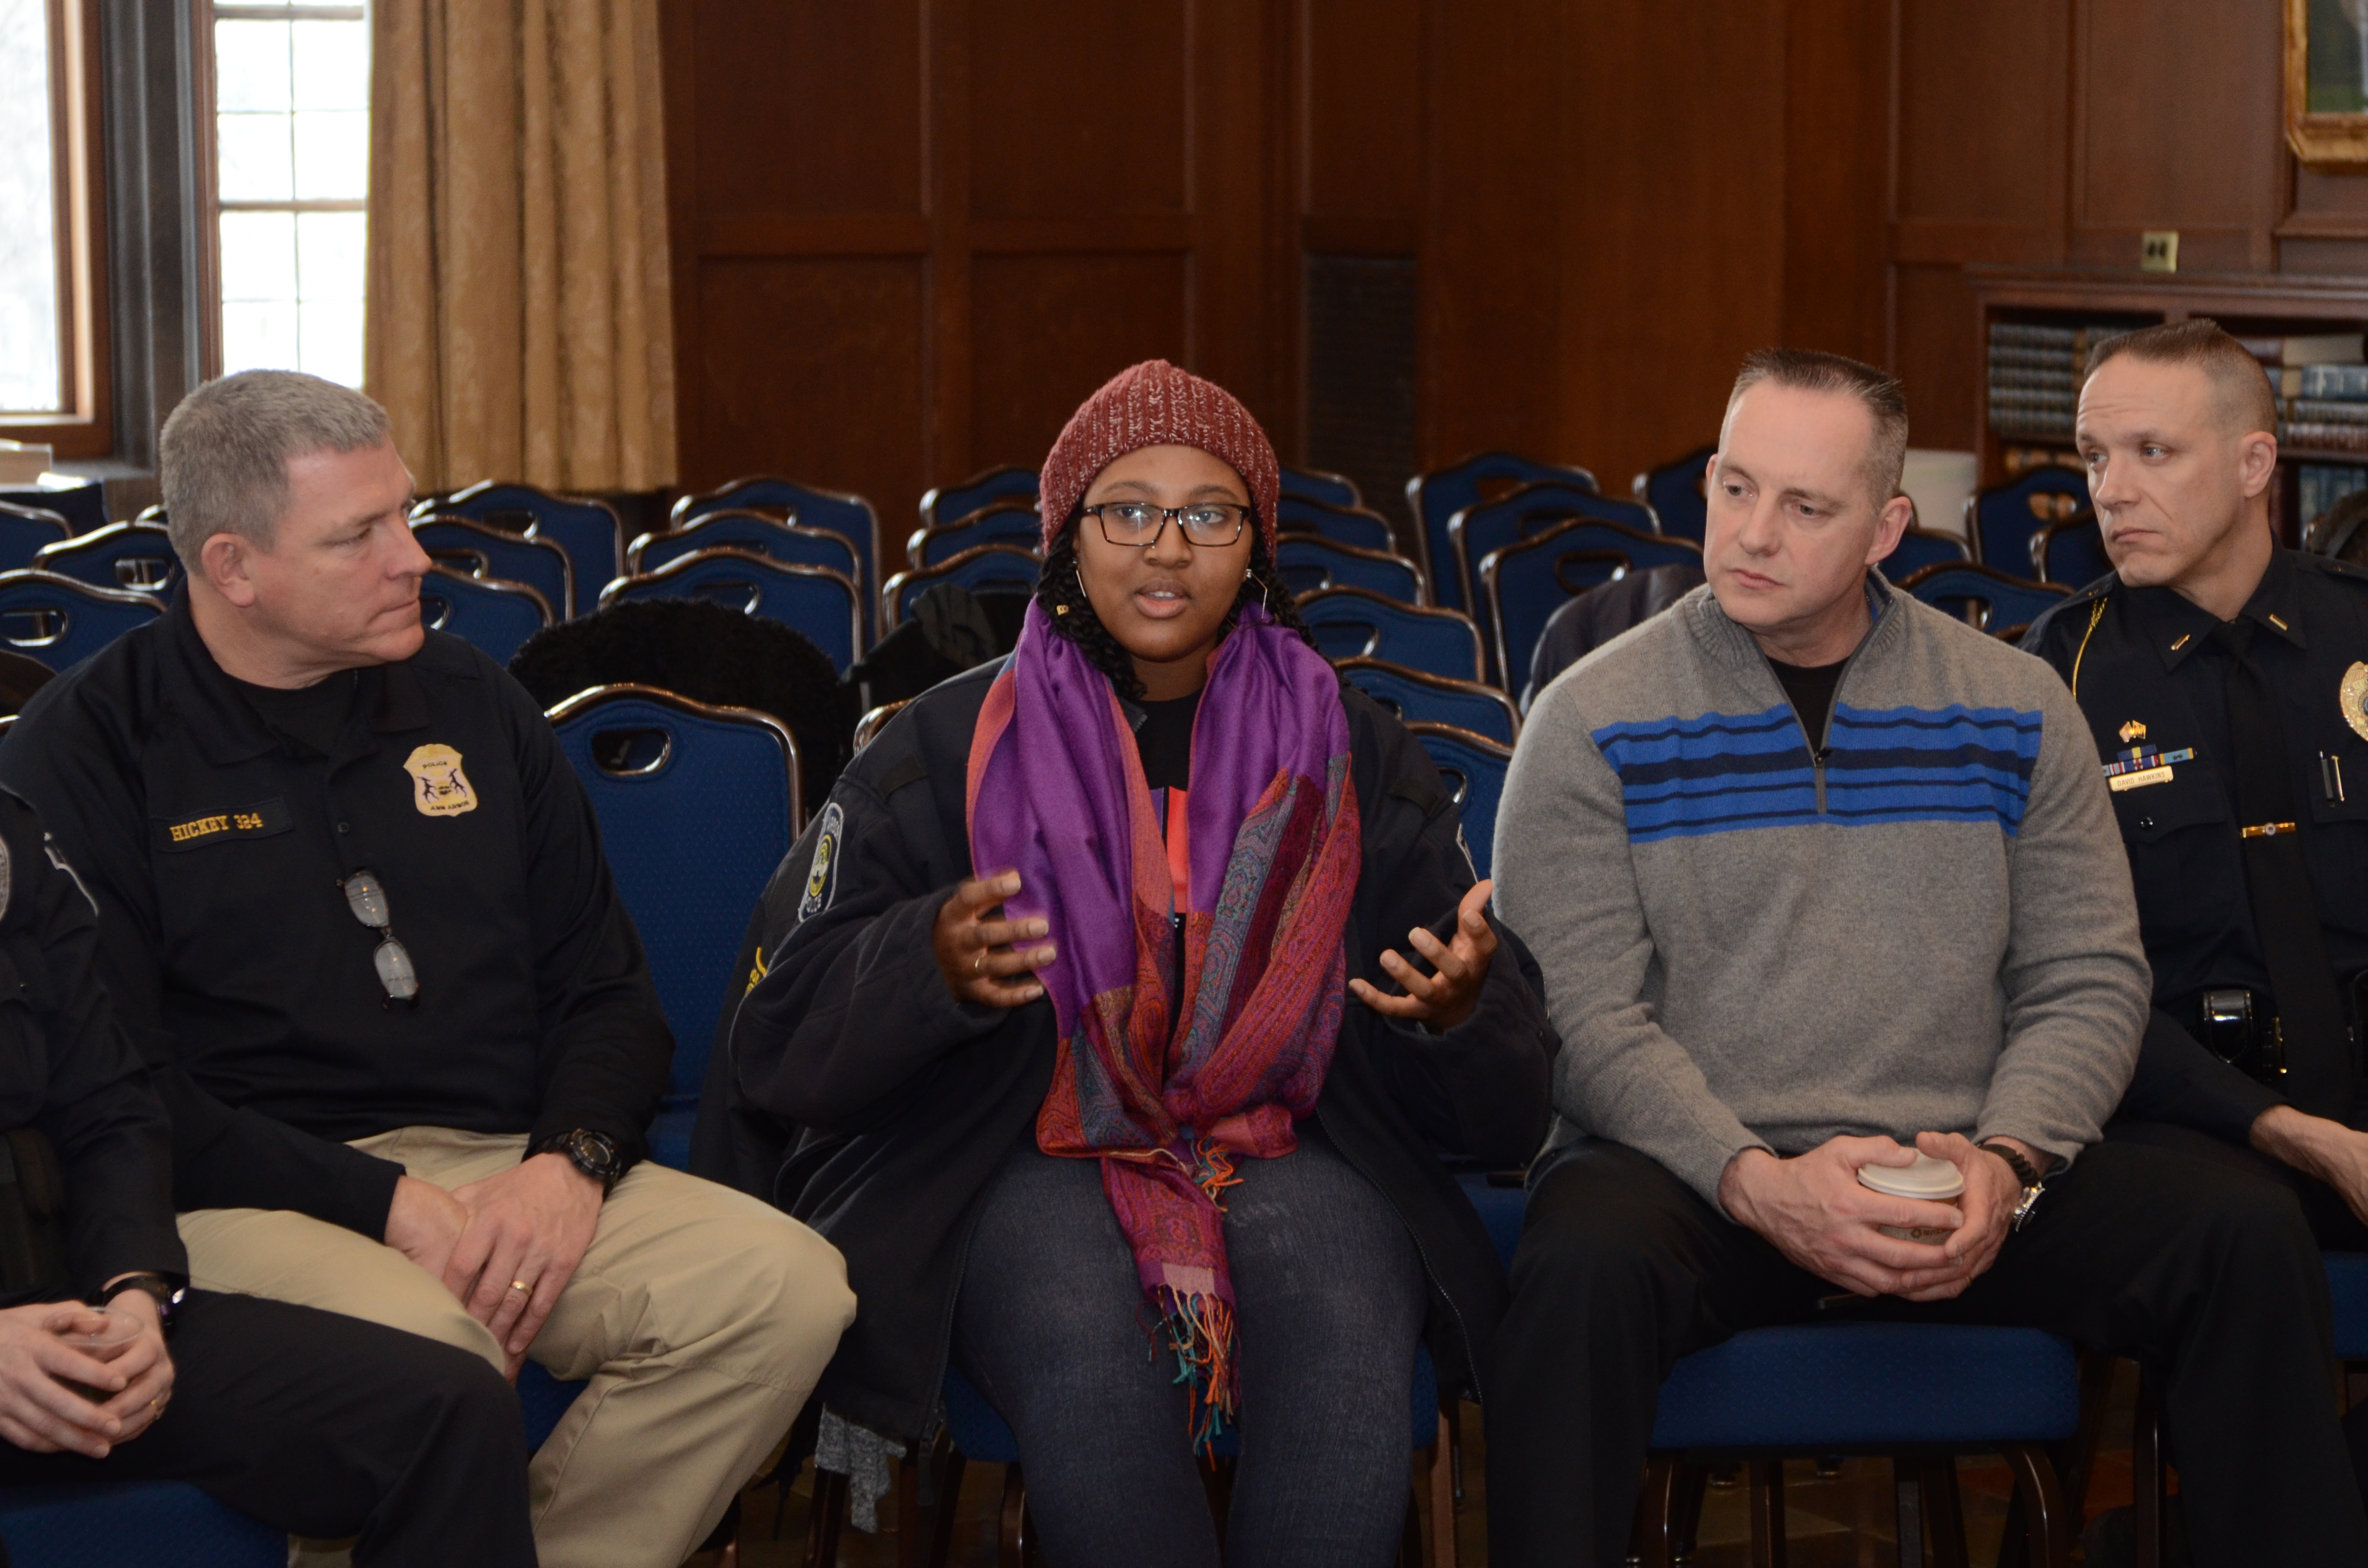 Students of Color met with local law enforcement to discuss the political and social climate on campus and nationally.